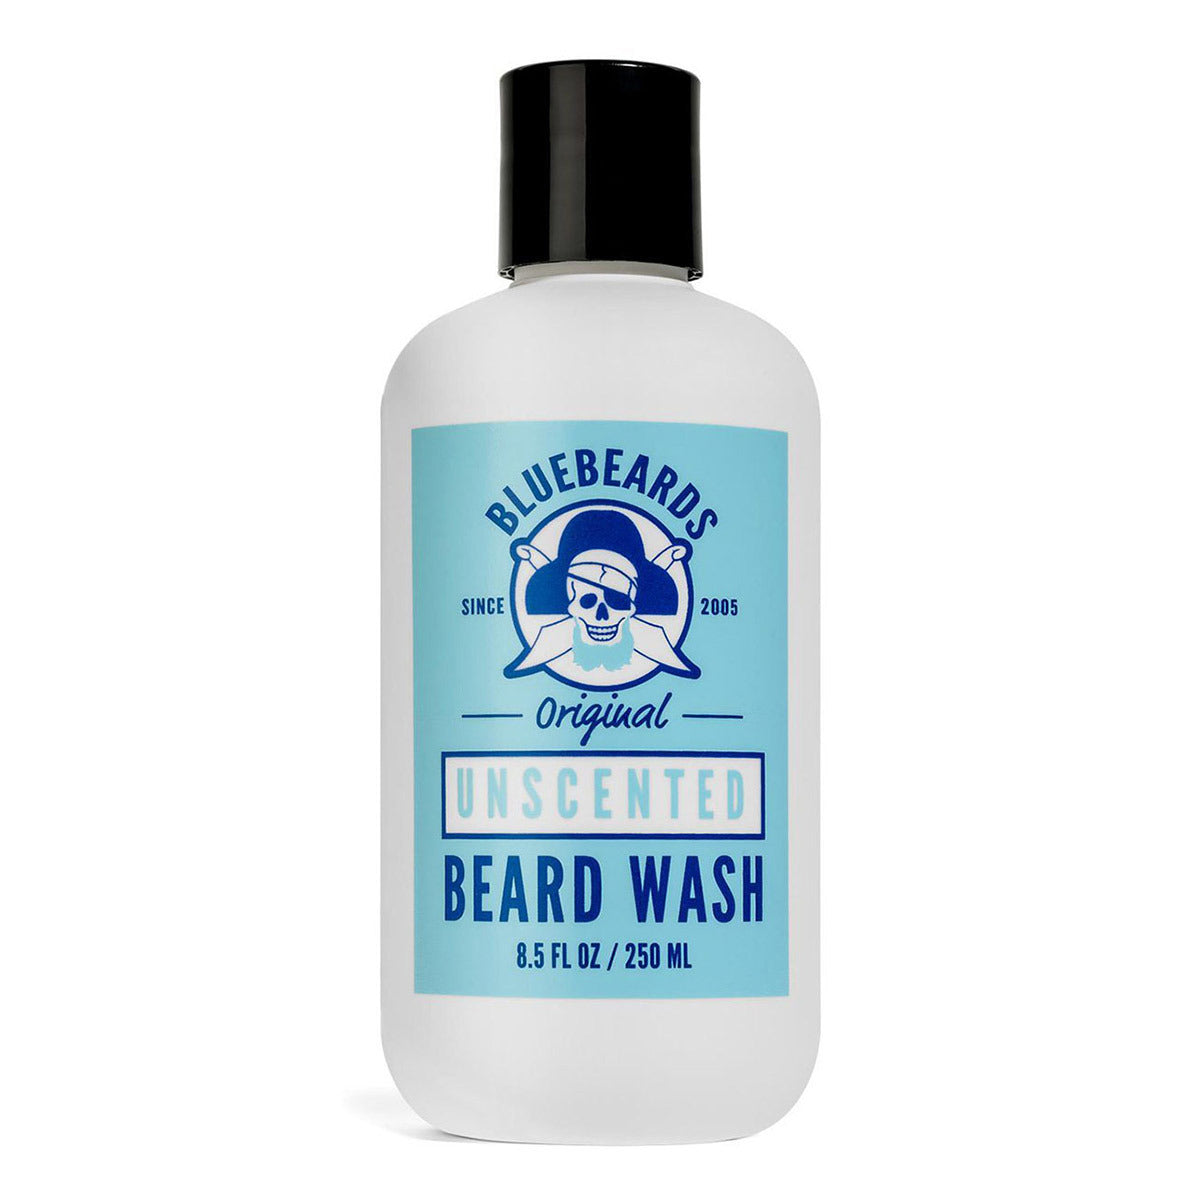 Primary image of Unscented Beard Wash